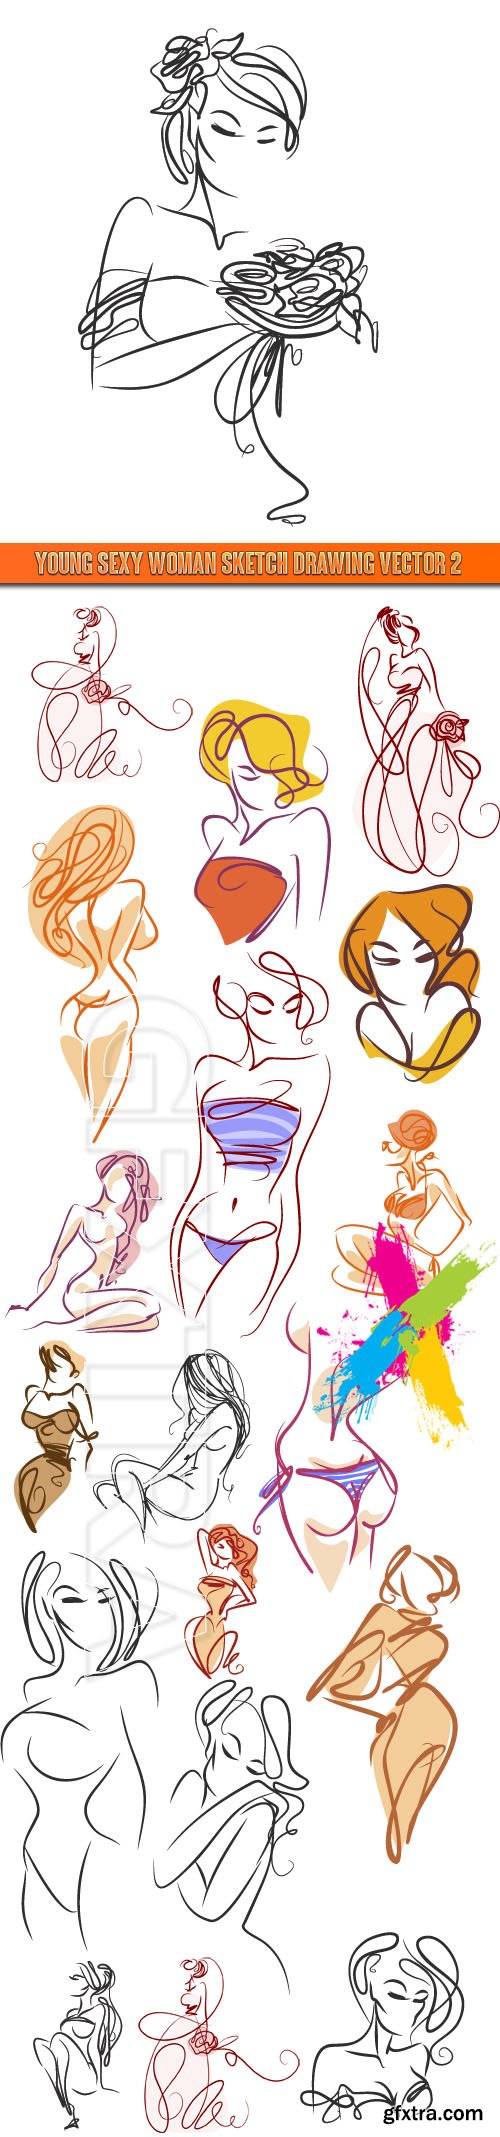 Young sexy woman sketch drawing vector 2